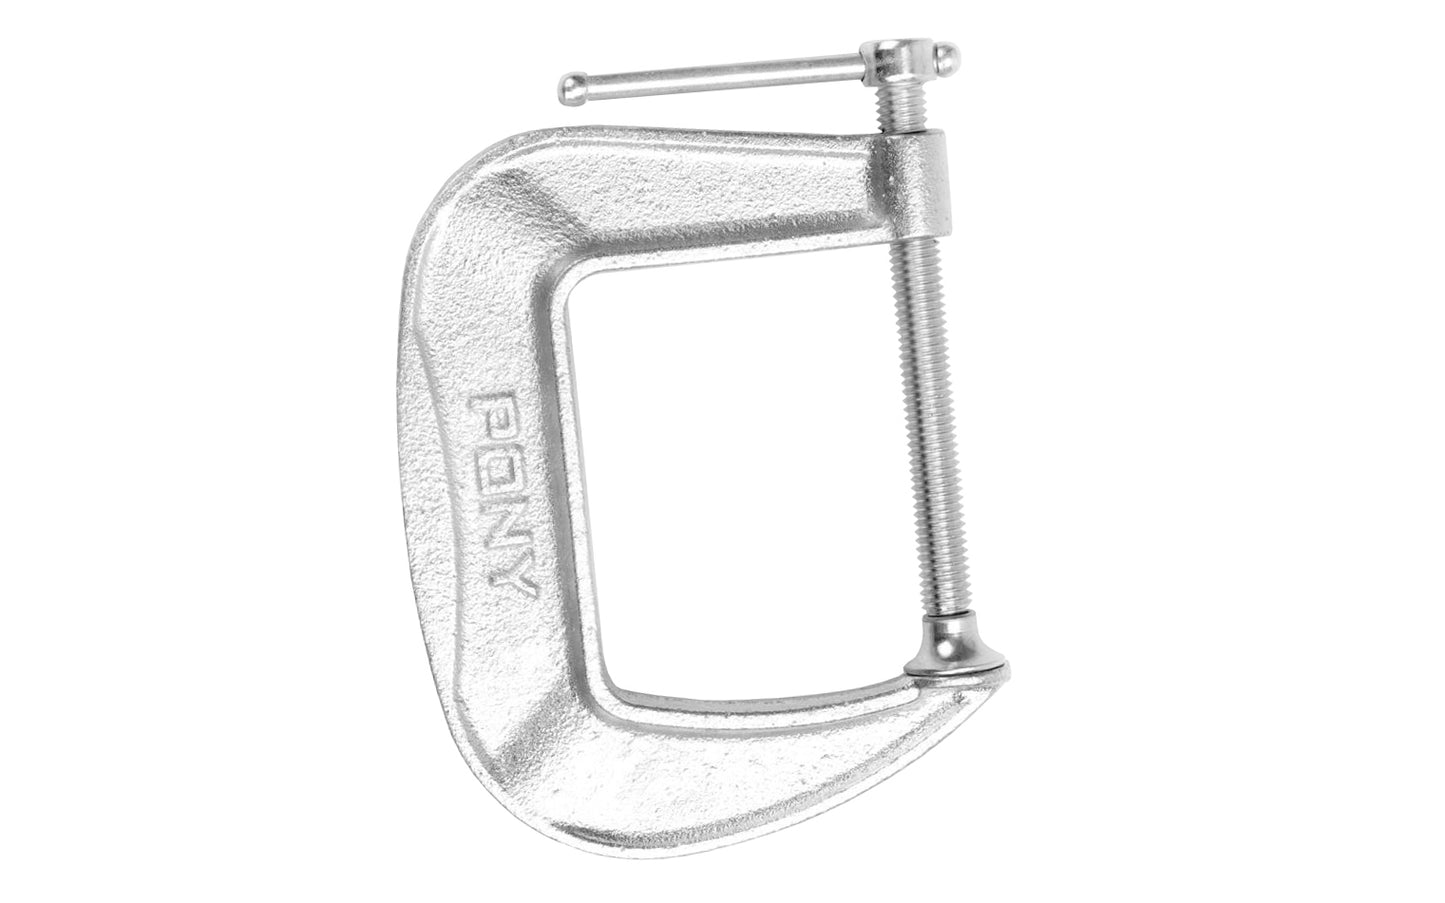 Pony C-Clamp ~ 2-1/2" Opening Capacity x 2-1/2" Jaw Depth - 2,200 lb. Clamping Force -  Pony Model No. 244 - Bright zinc plated steel ~ 044295004060